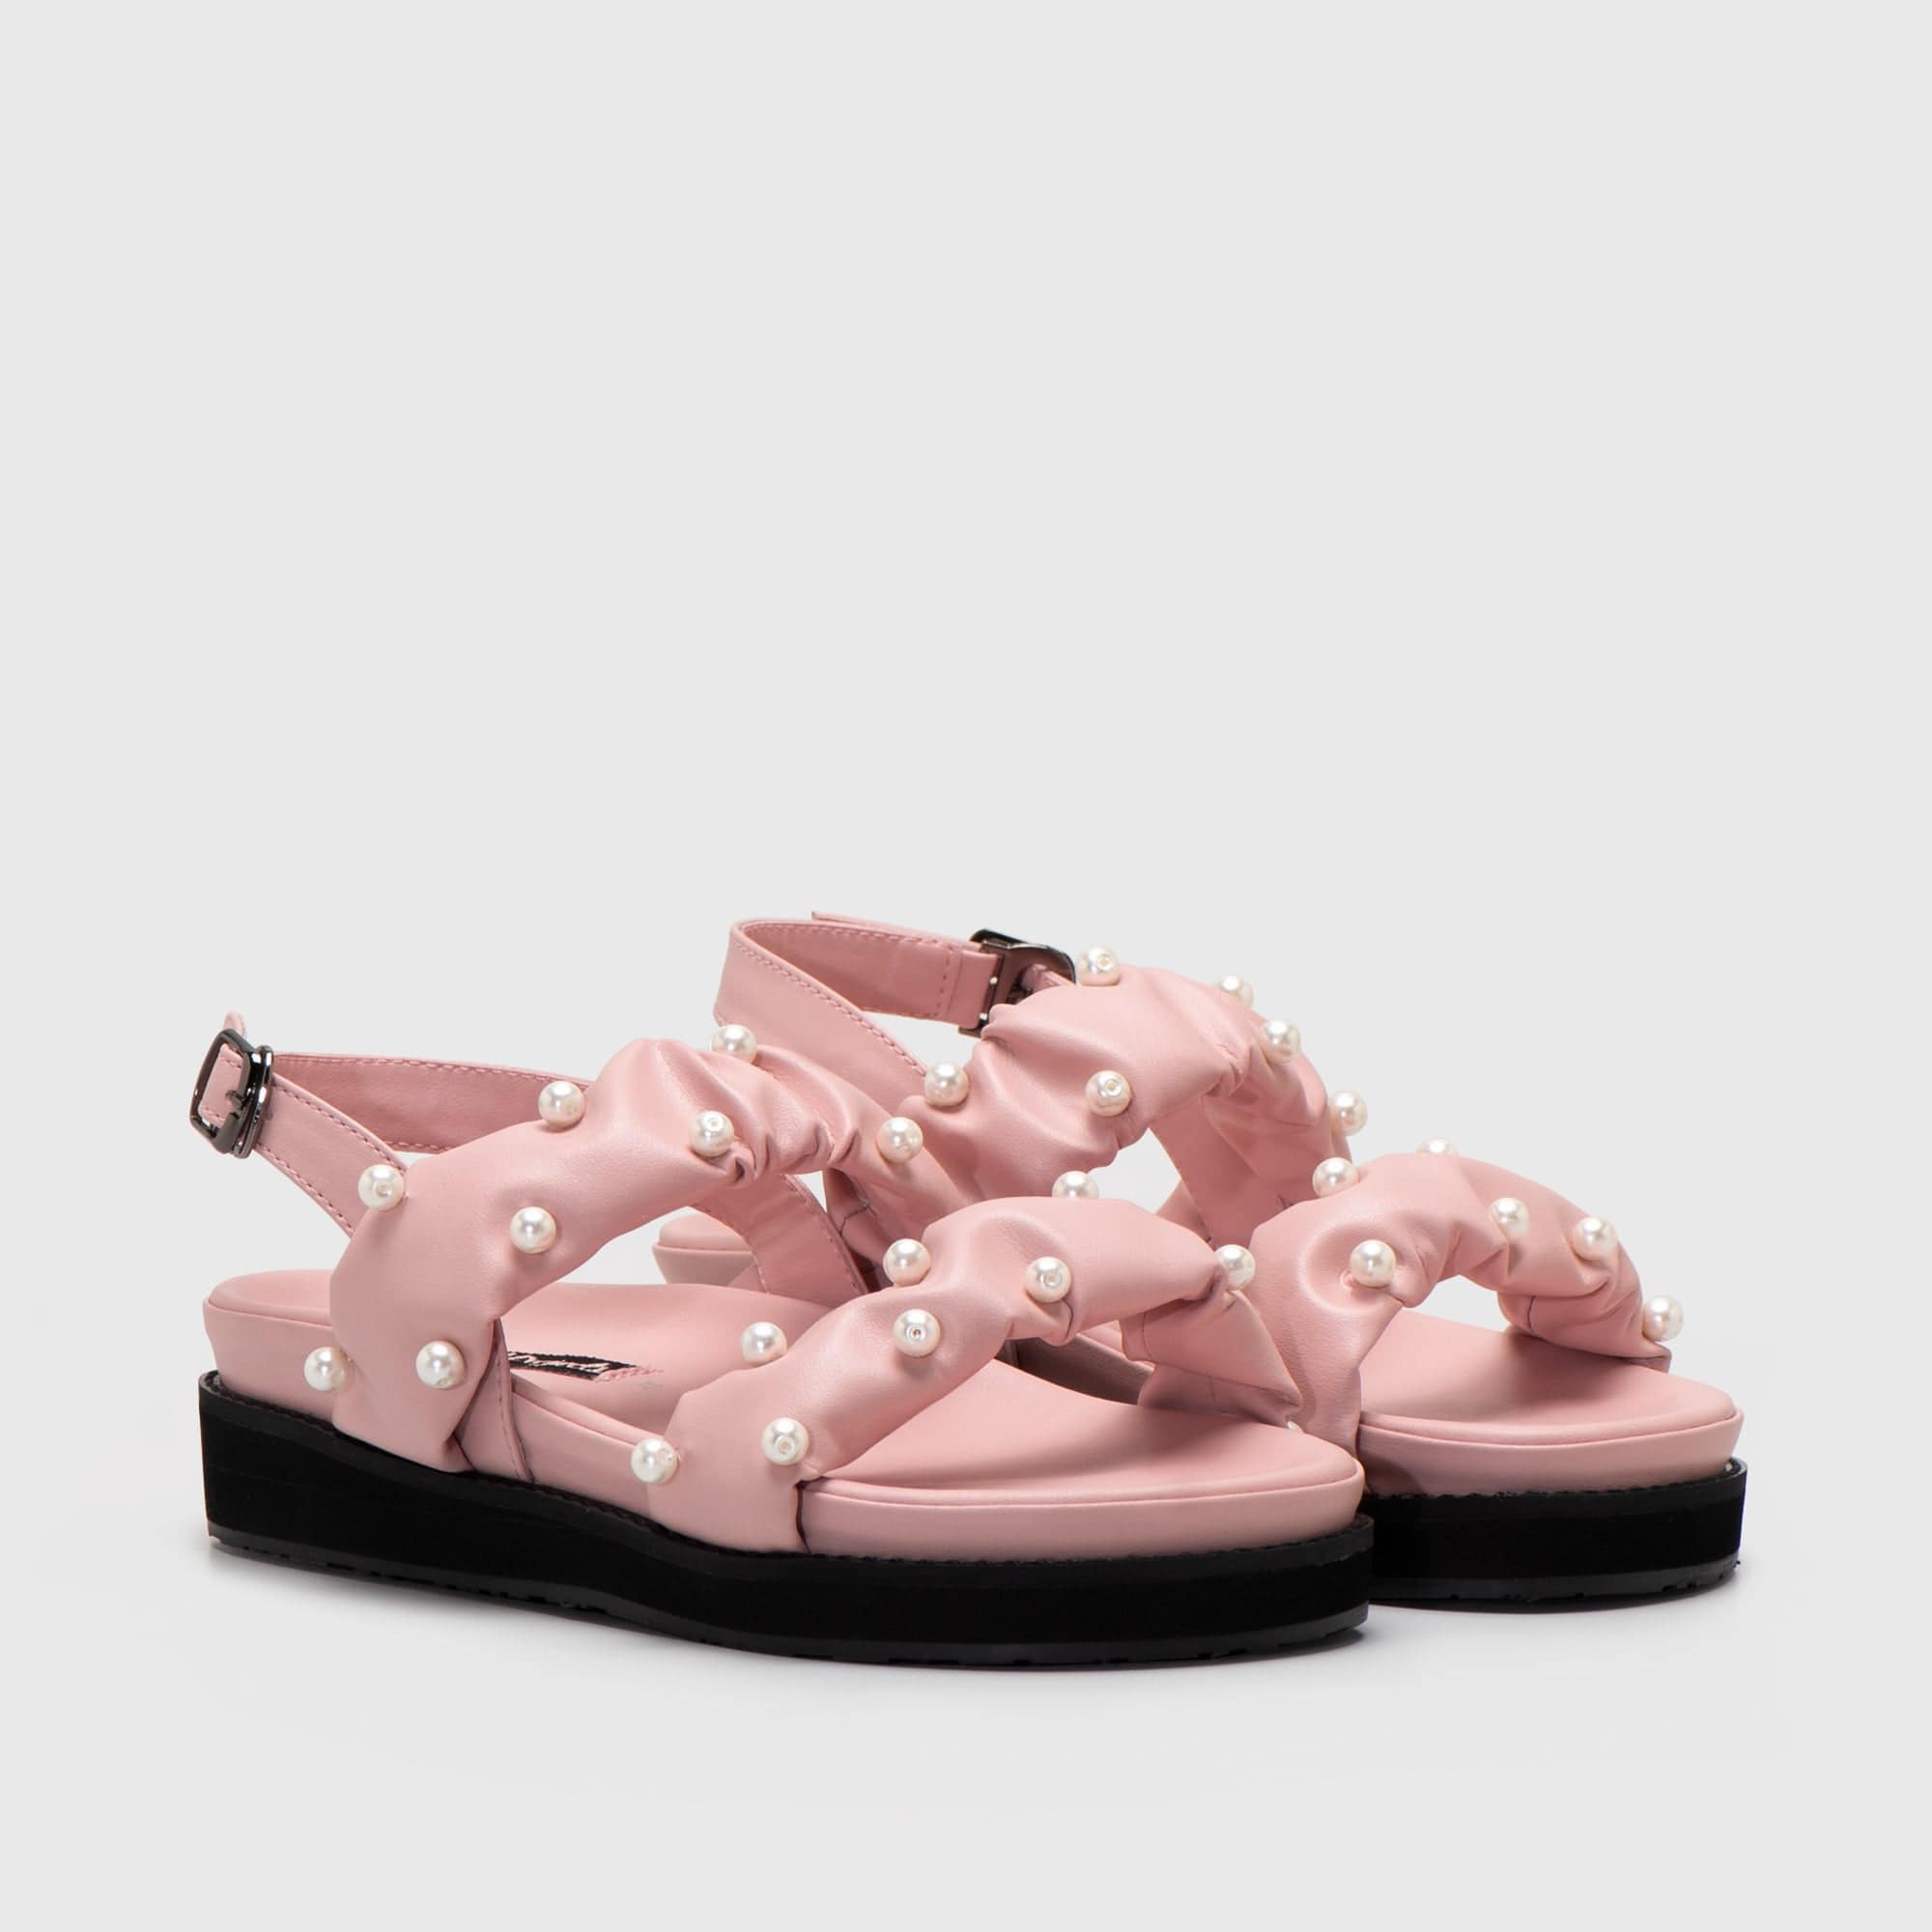 Adorable Projects Official 37 Parinda Sandals Pink